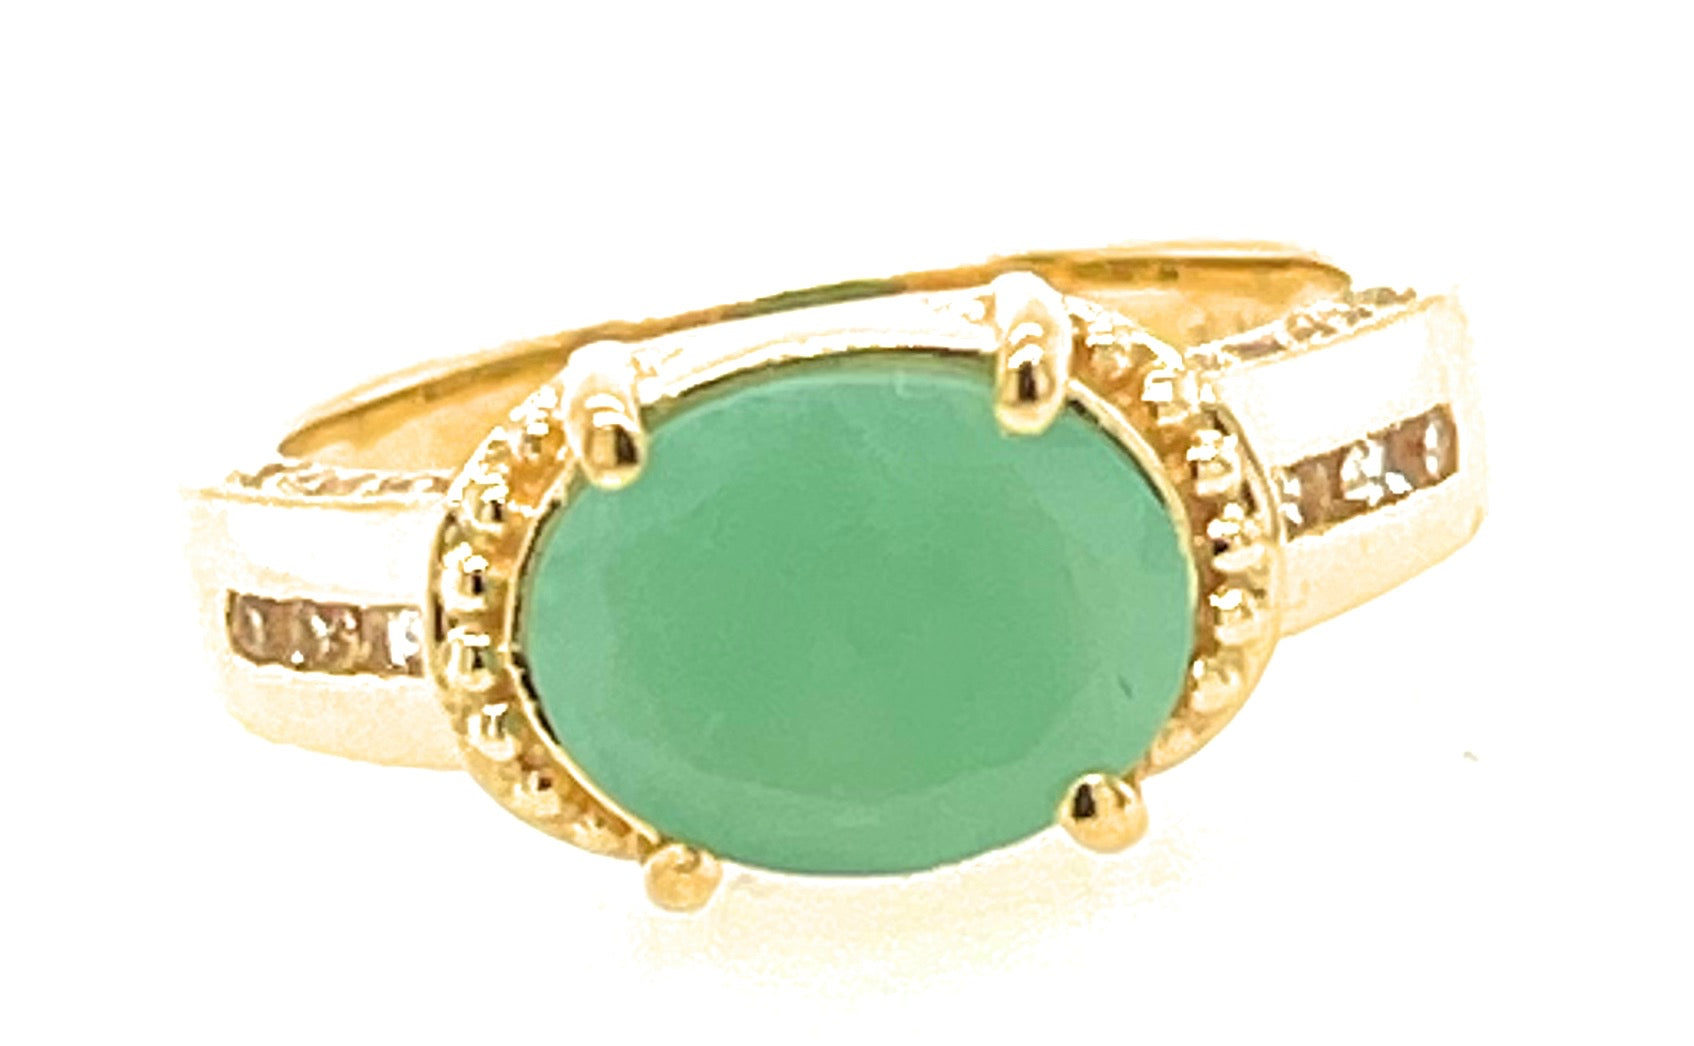 Natural Green Emerald, White Topaz 14k Vermeil Gold Over Silver Wedding Ring size 5, 6, 7, 8, 9 - Natural Rocks by Kala